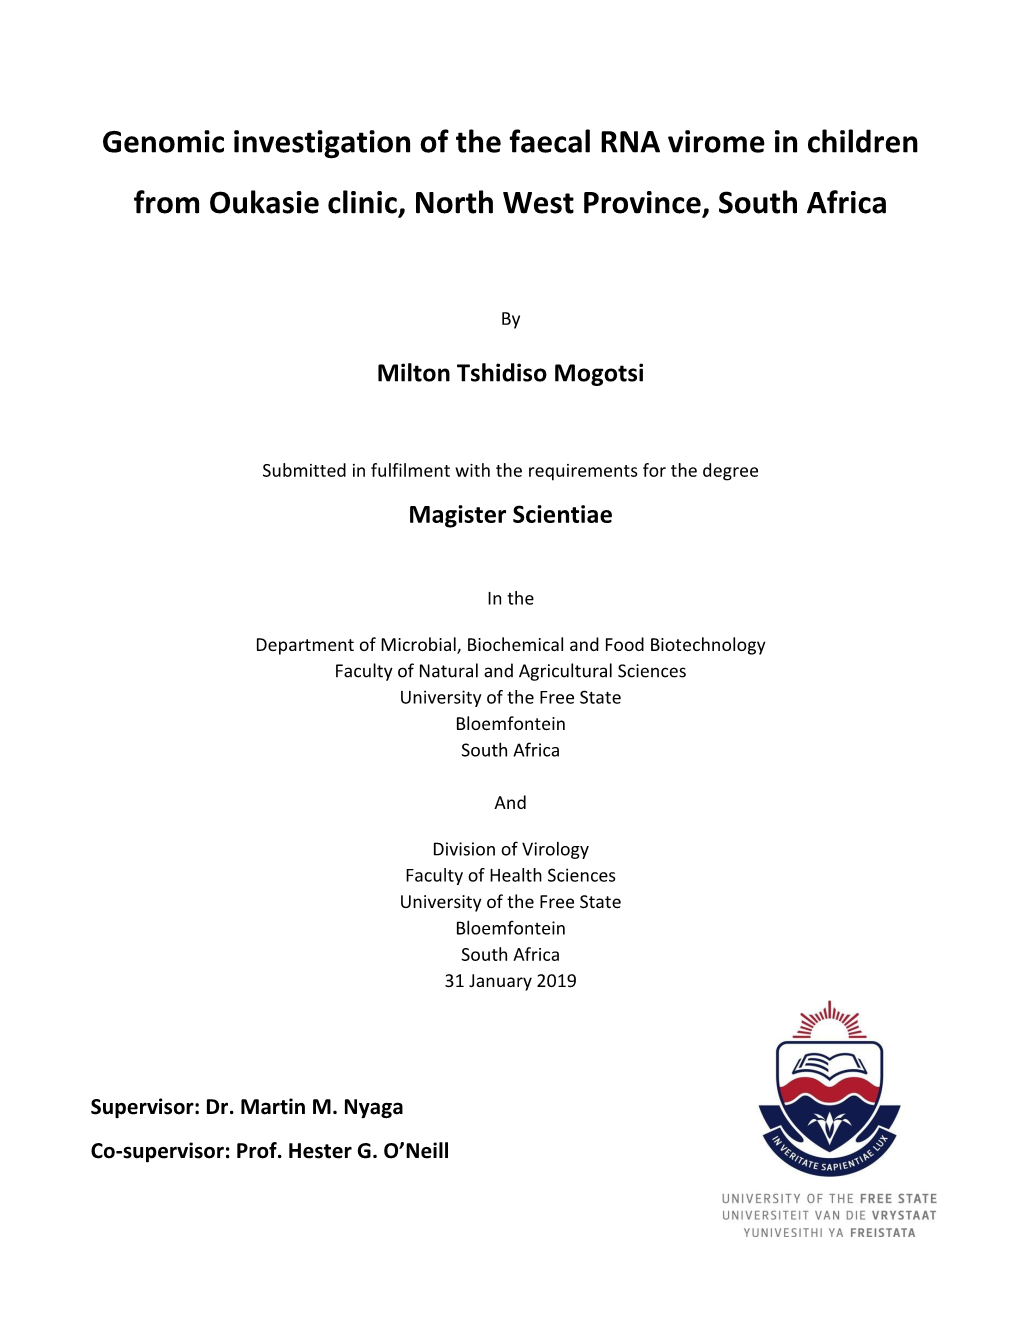 Genomic Investigation of the Faecal RNA Virome in Children from Oukasie Clinic, North West Province, South Africa